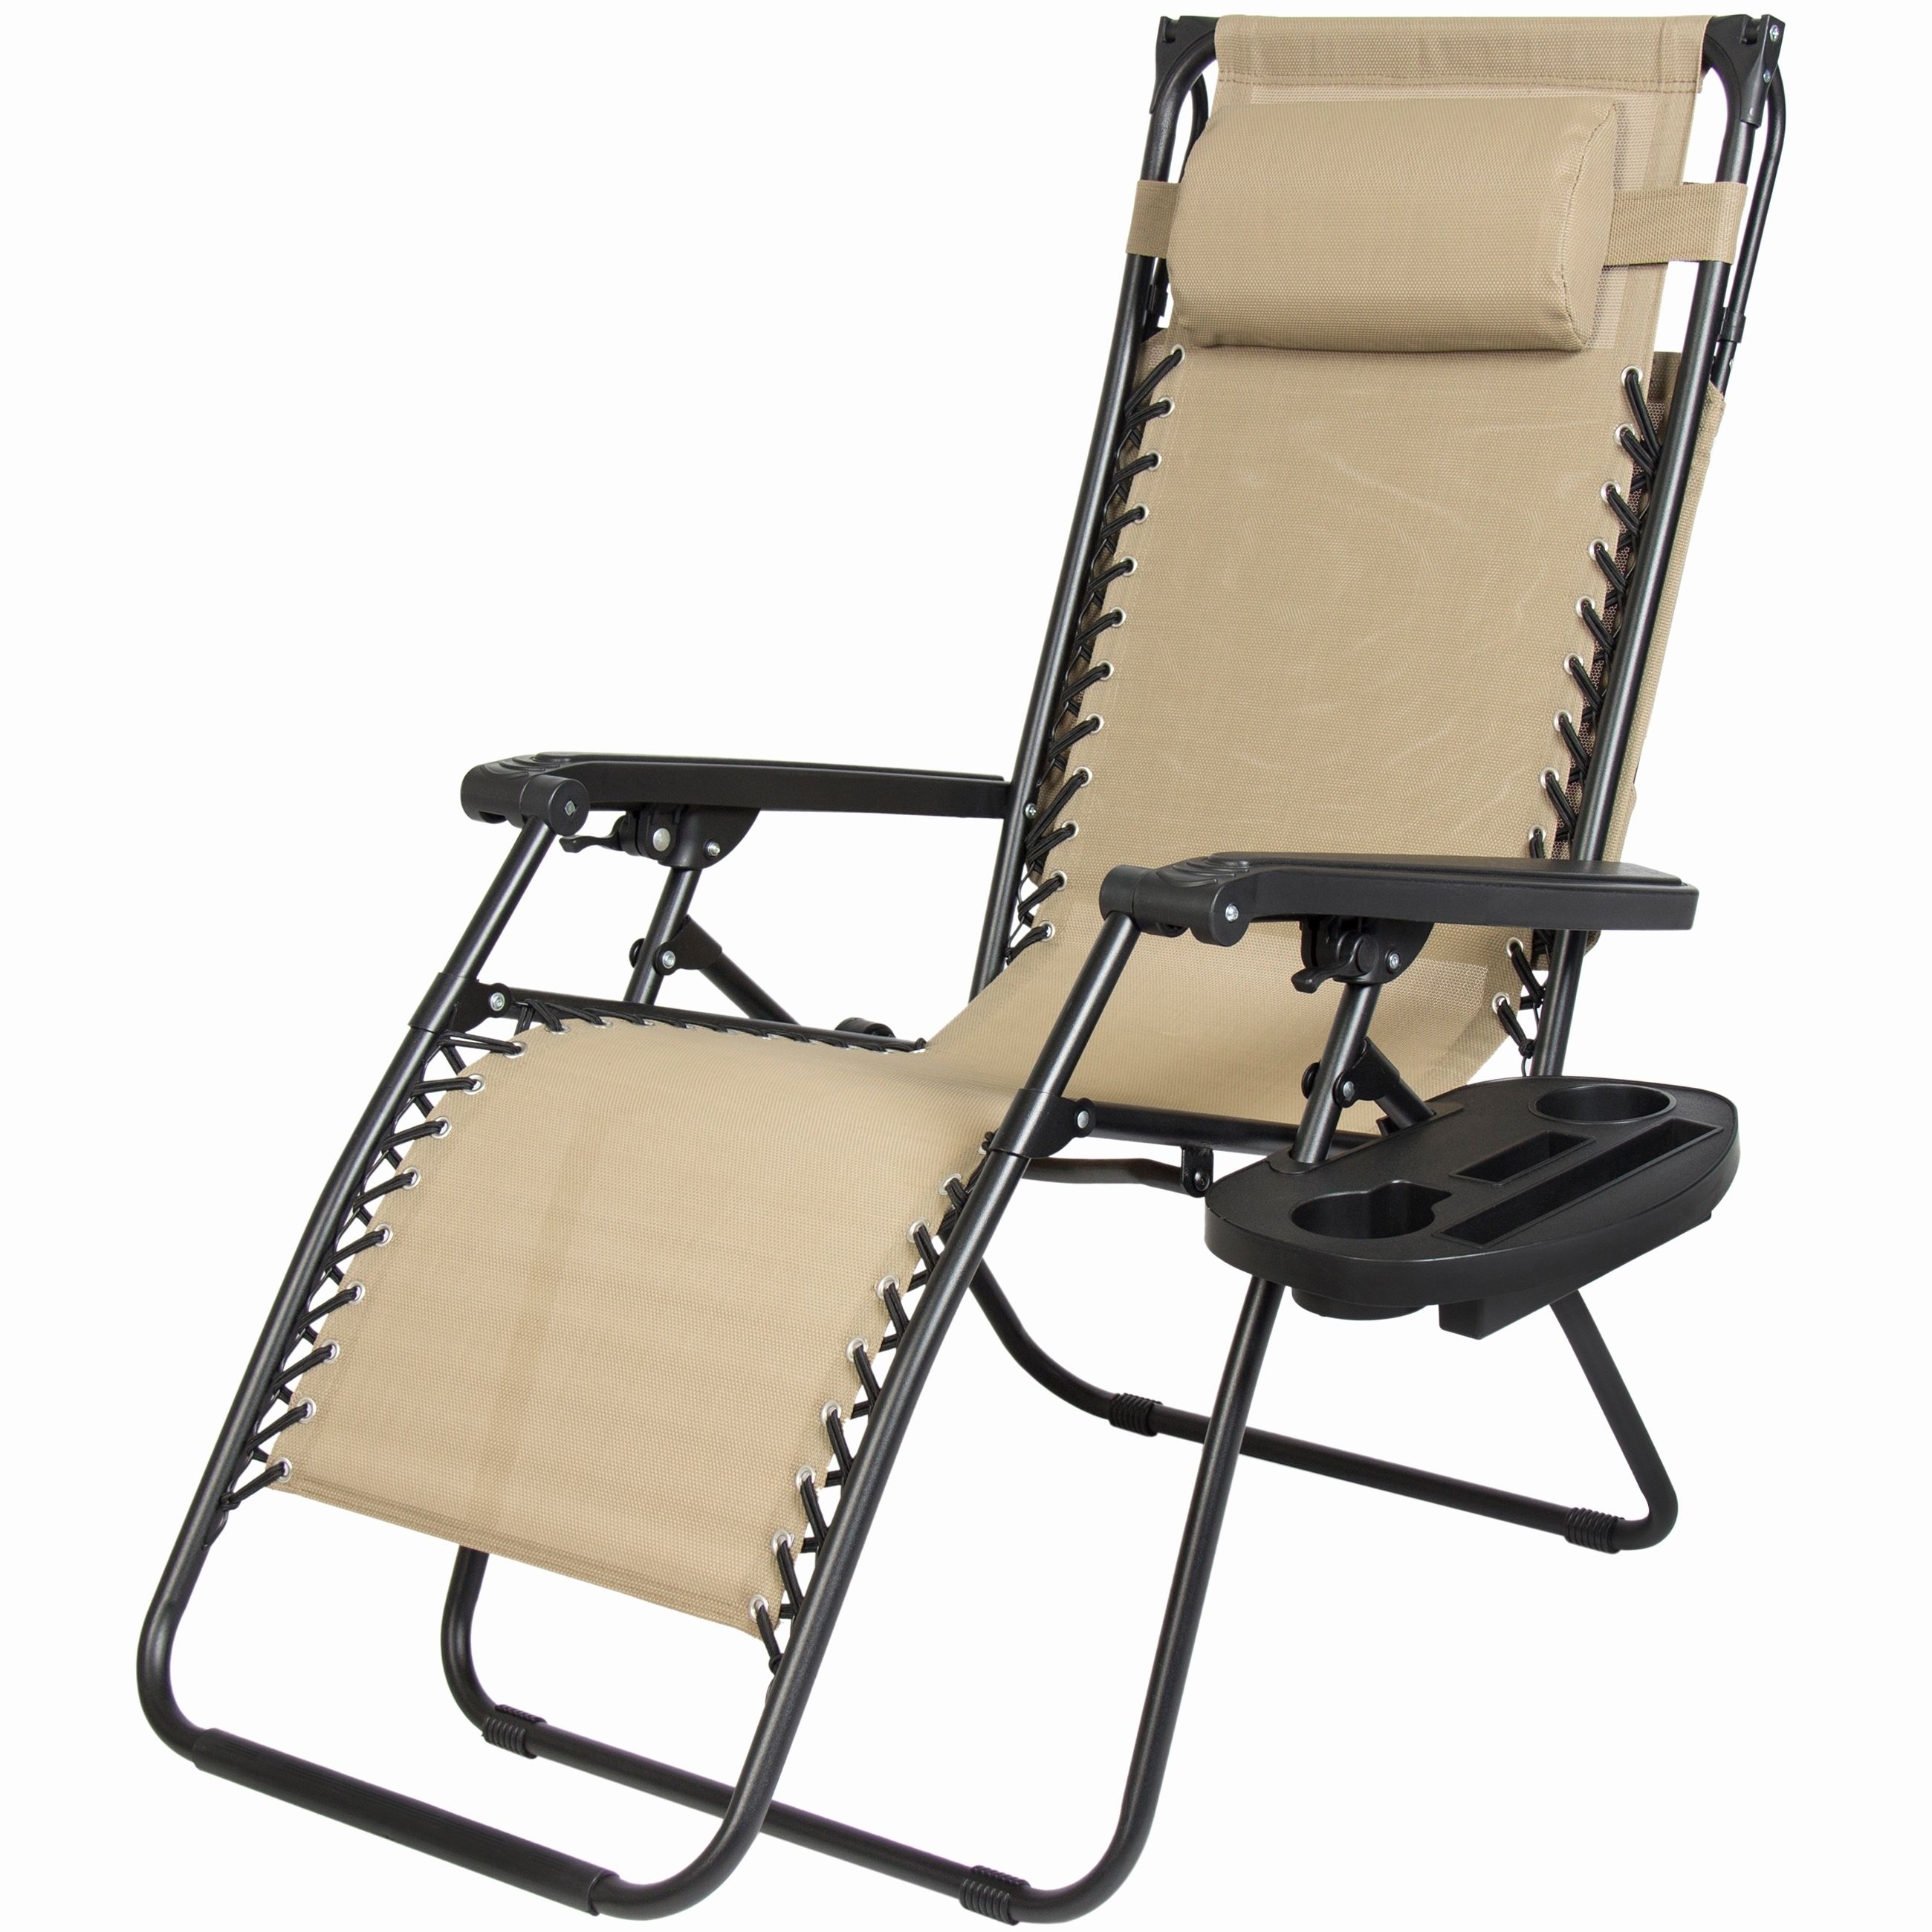 Outdoor : Folding Outdoor Lounge Chairs Outdoor Double Chaise In 2017 Target Outdoor Chaise Lounges (View 9 of 15)